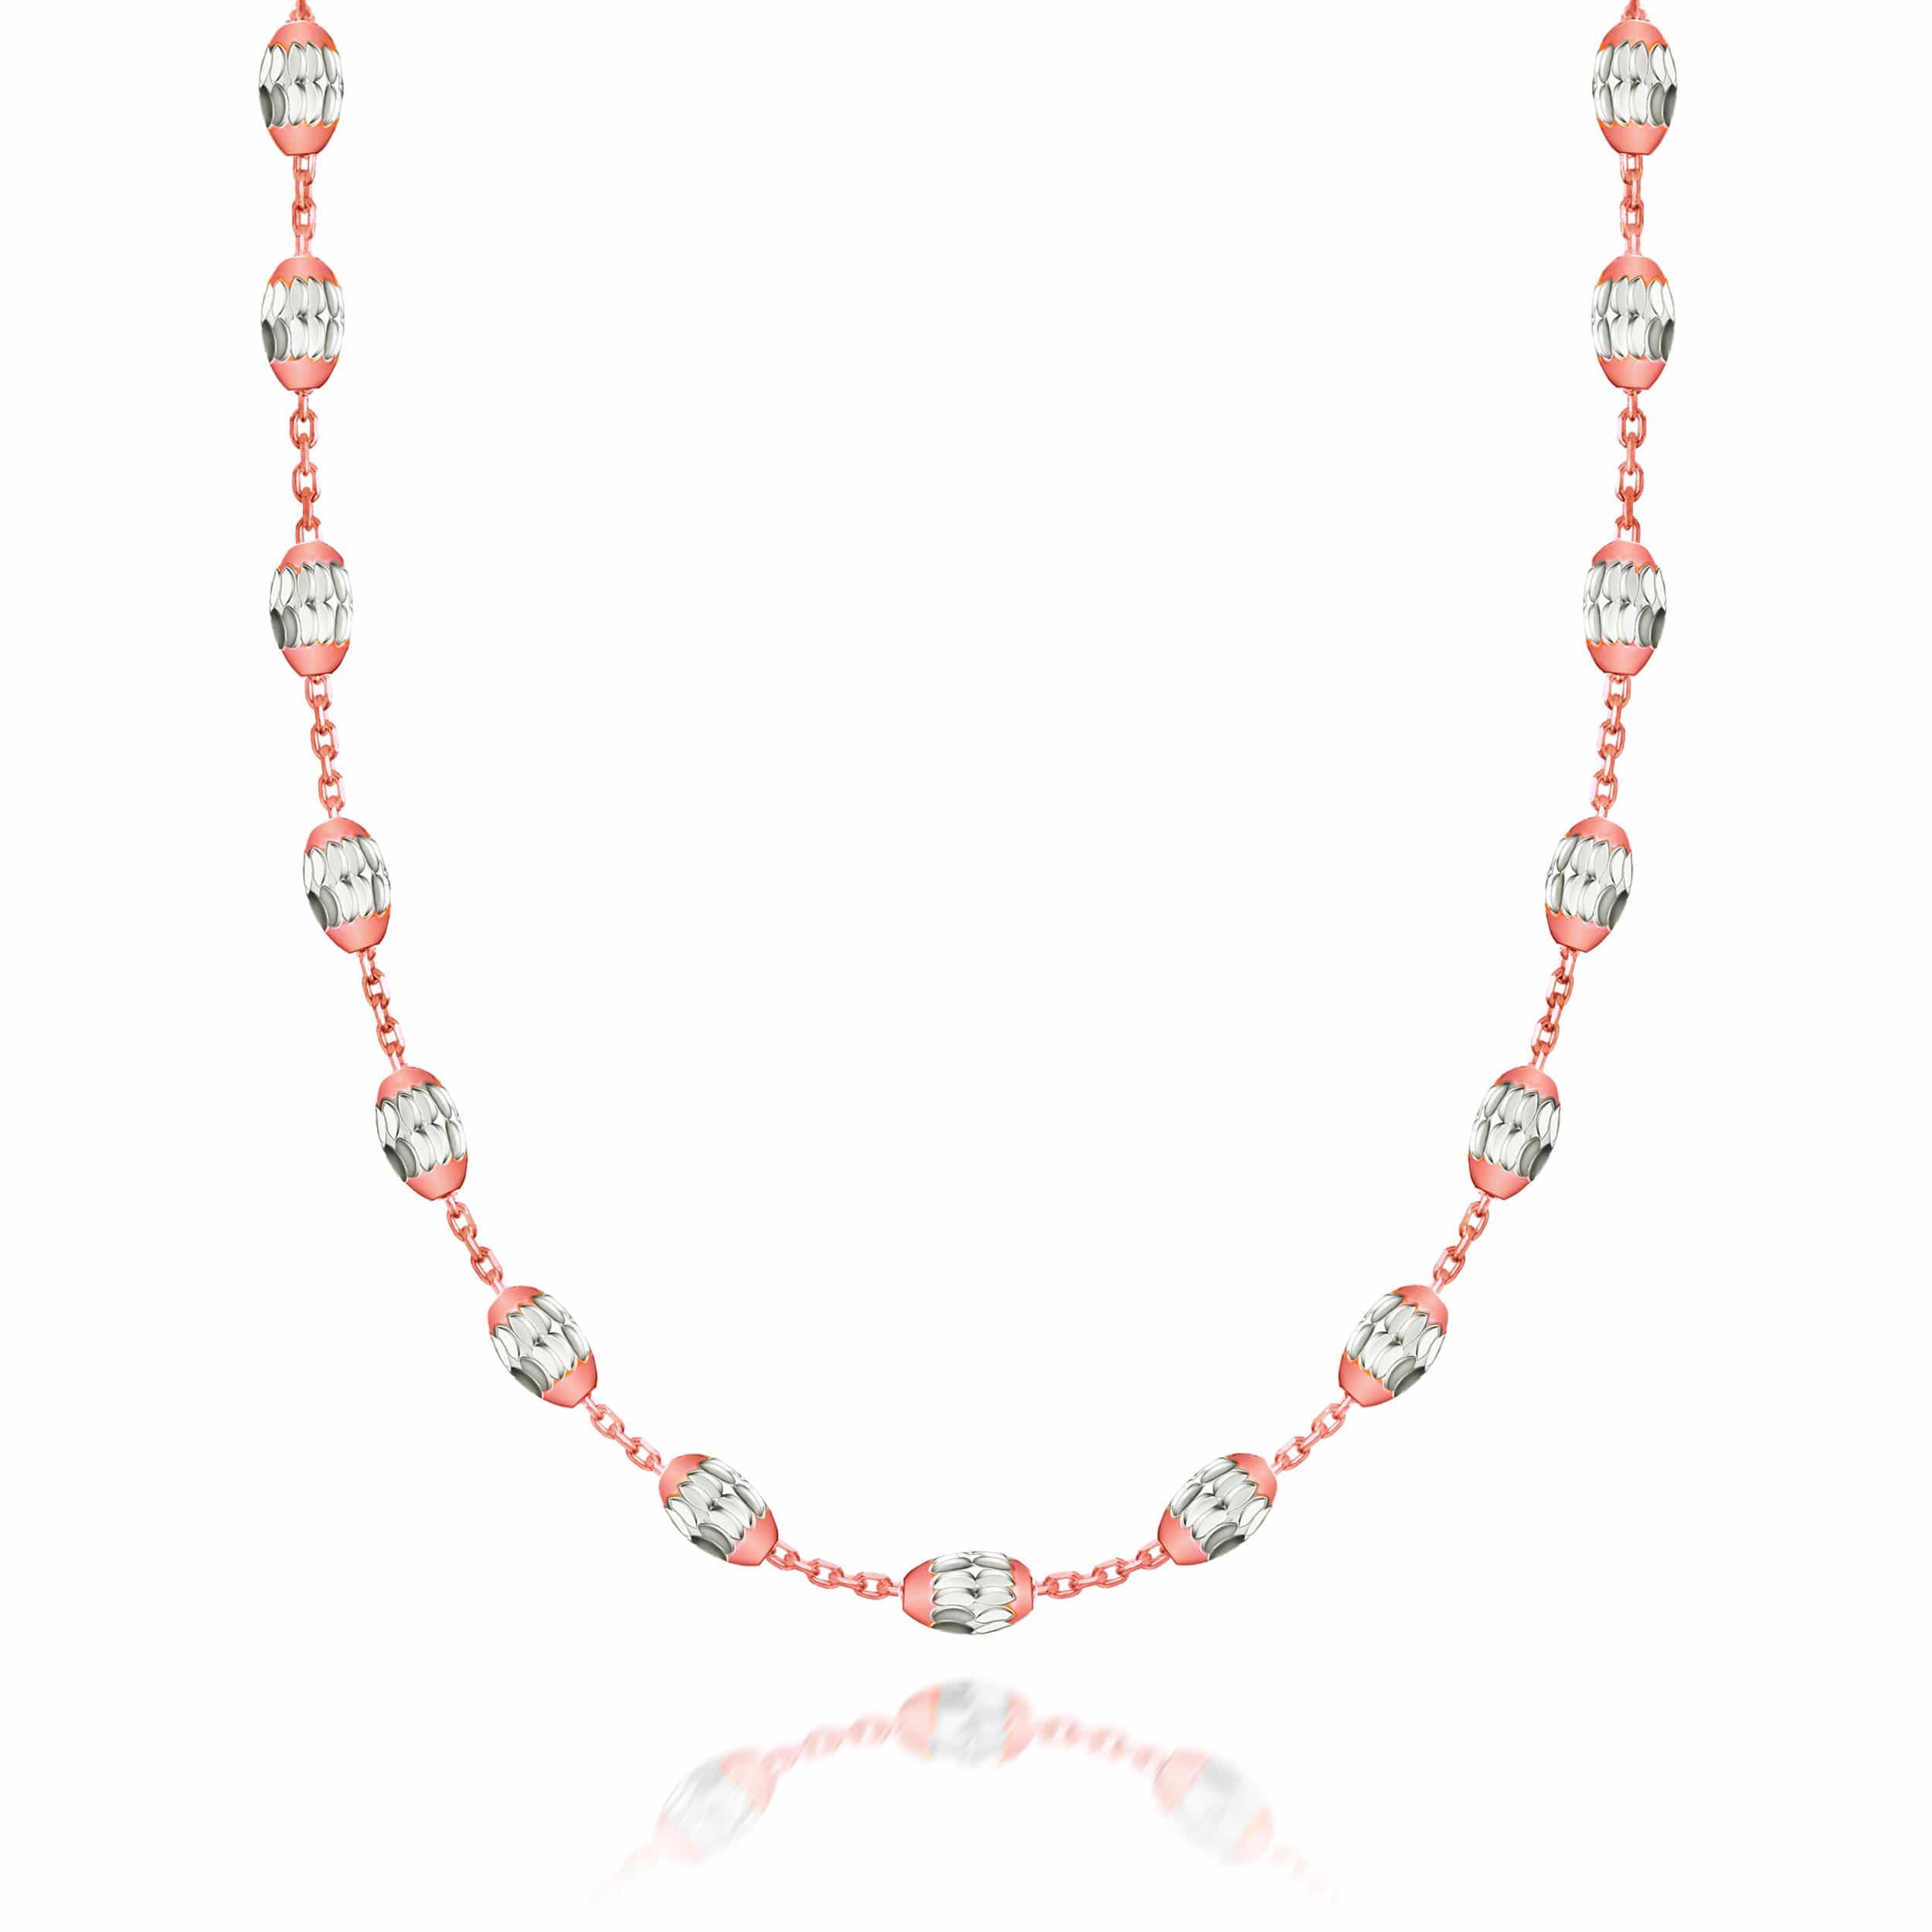 Lynora Jewellery Necklace Geobeads Necklace Rose Gold Plate with Silver Beads